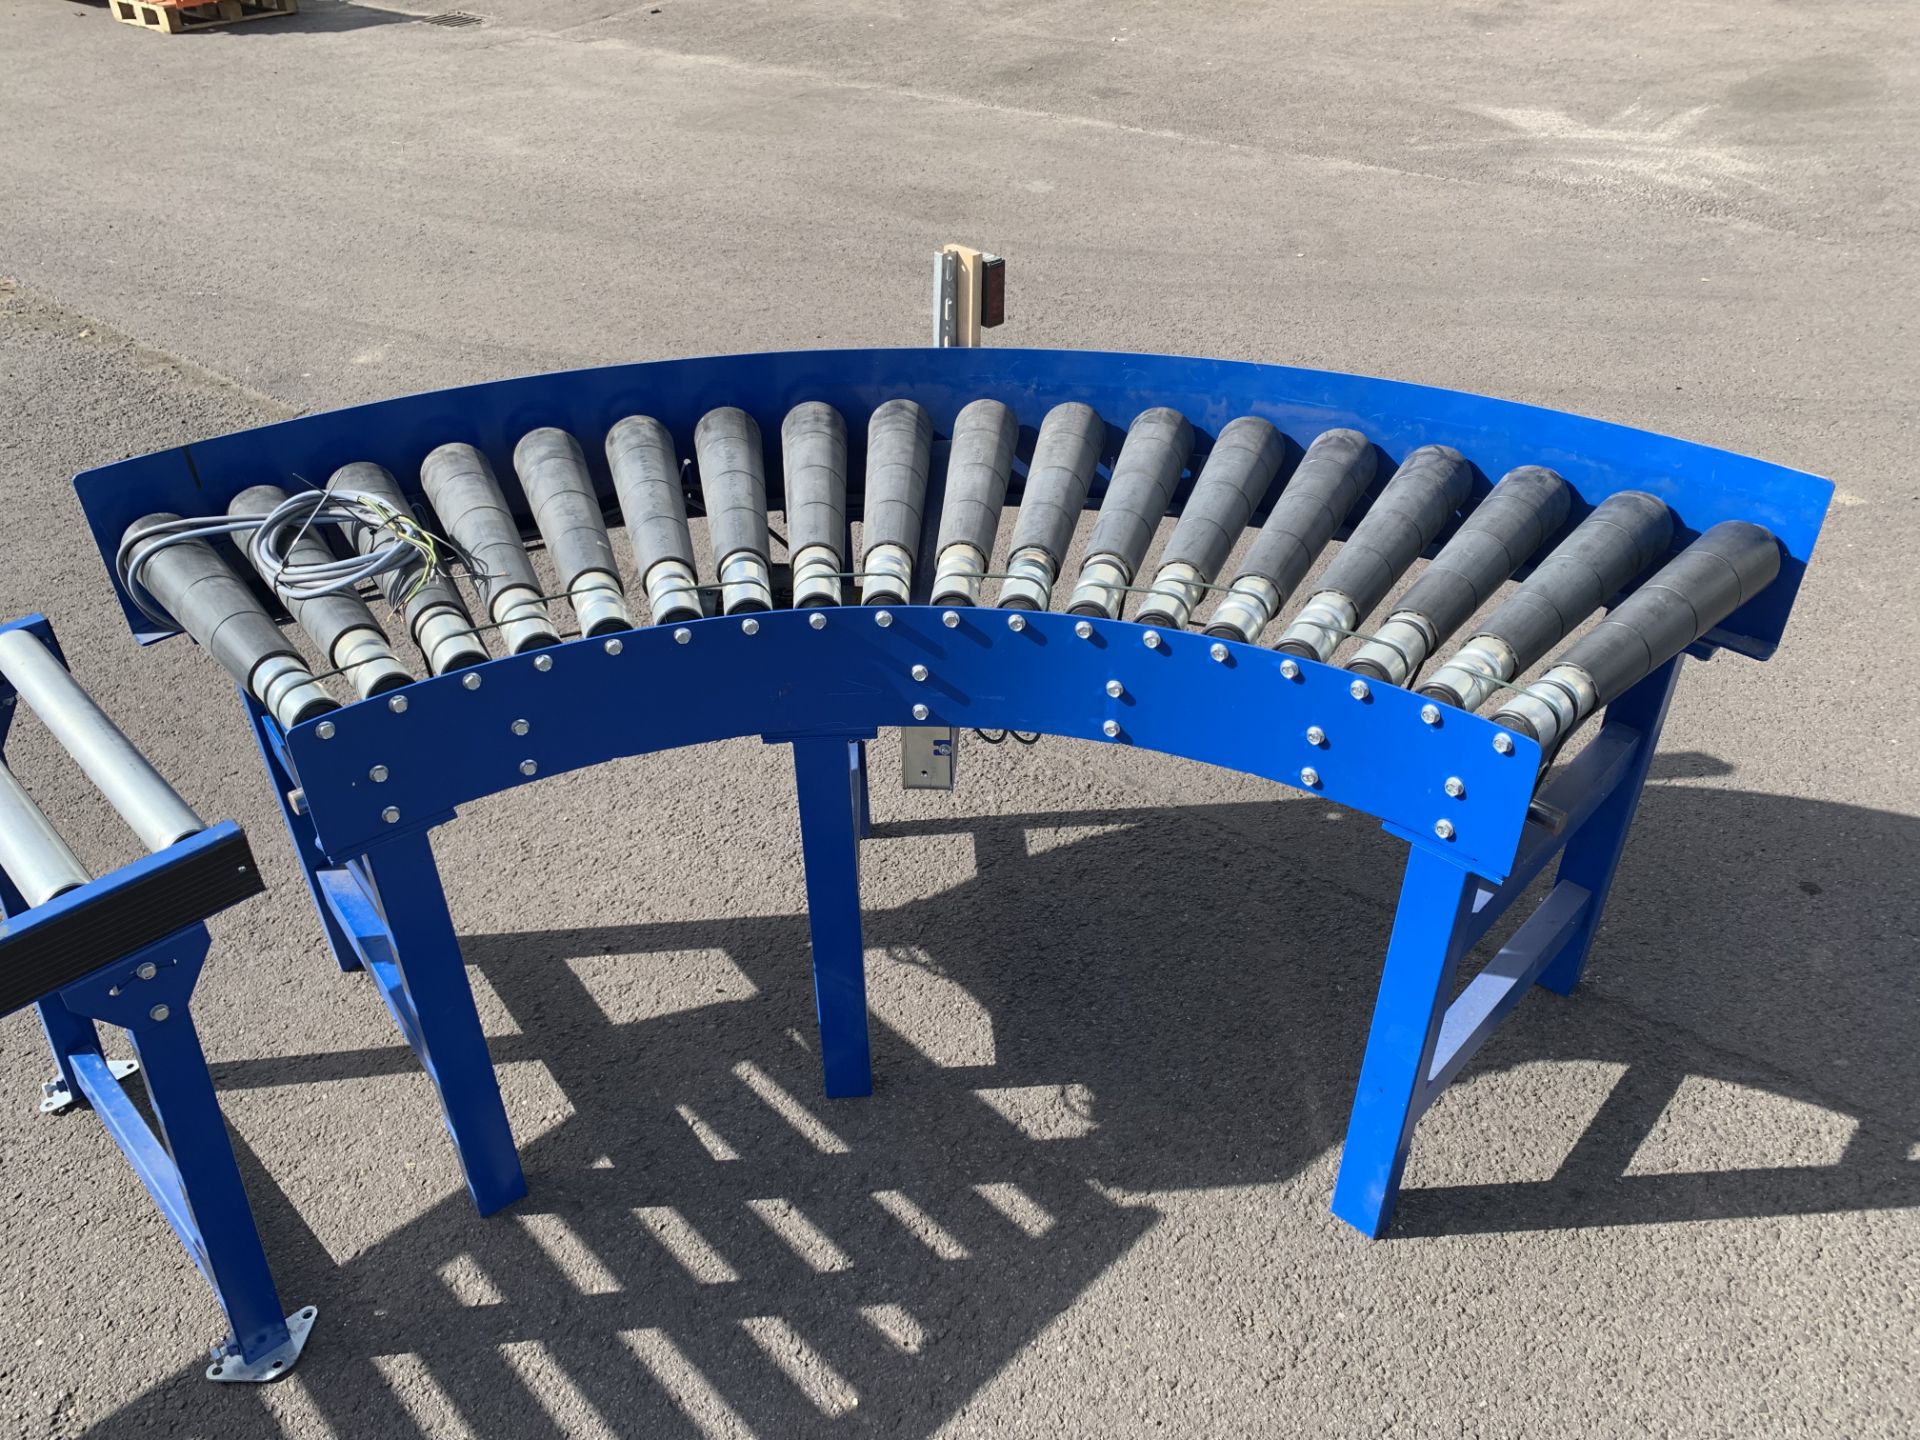 Powered Roller Conveyor Comprising of 4 Components - Image 11 of 14